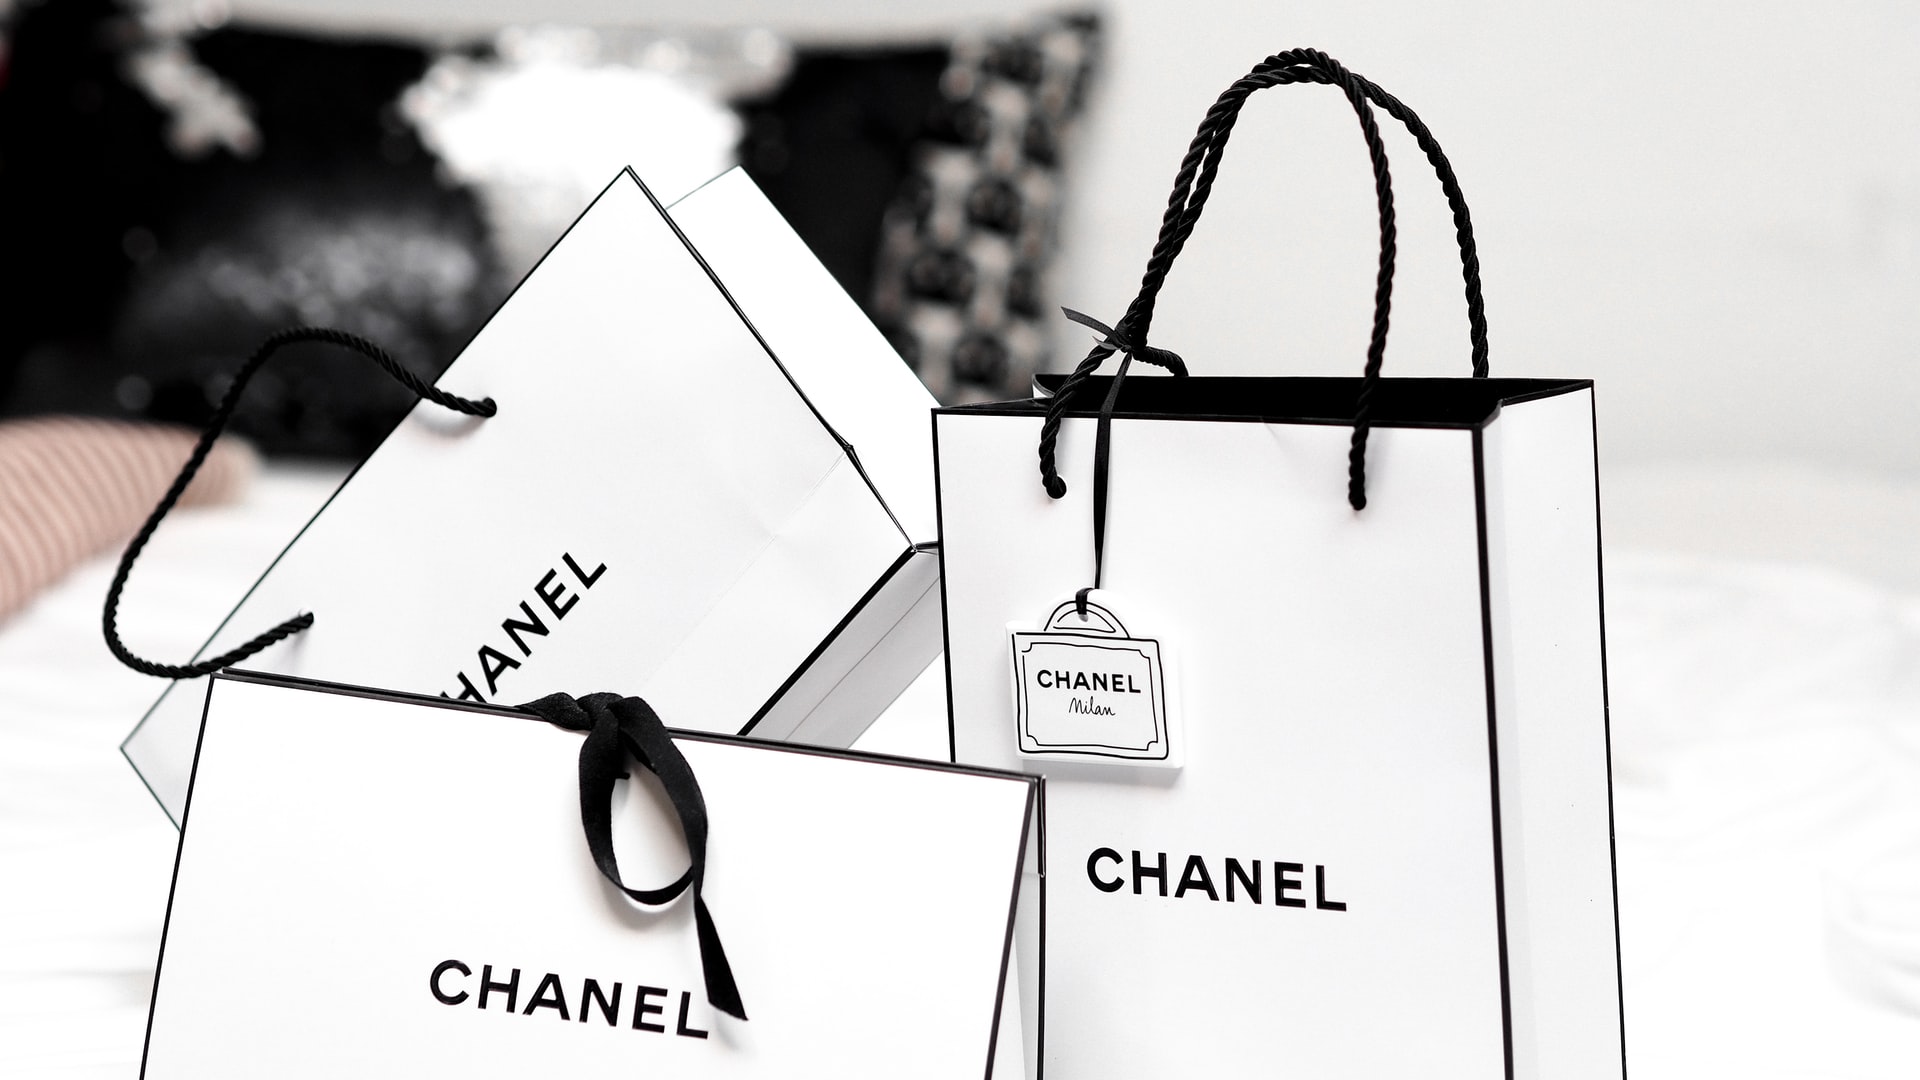 White Chanel shopping bags